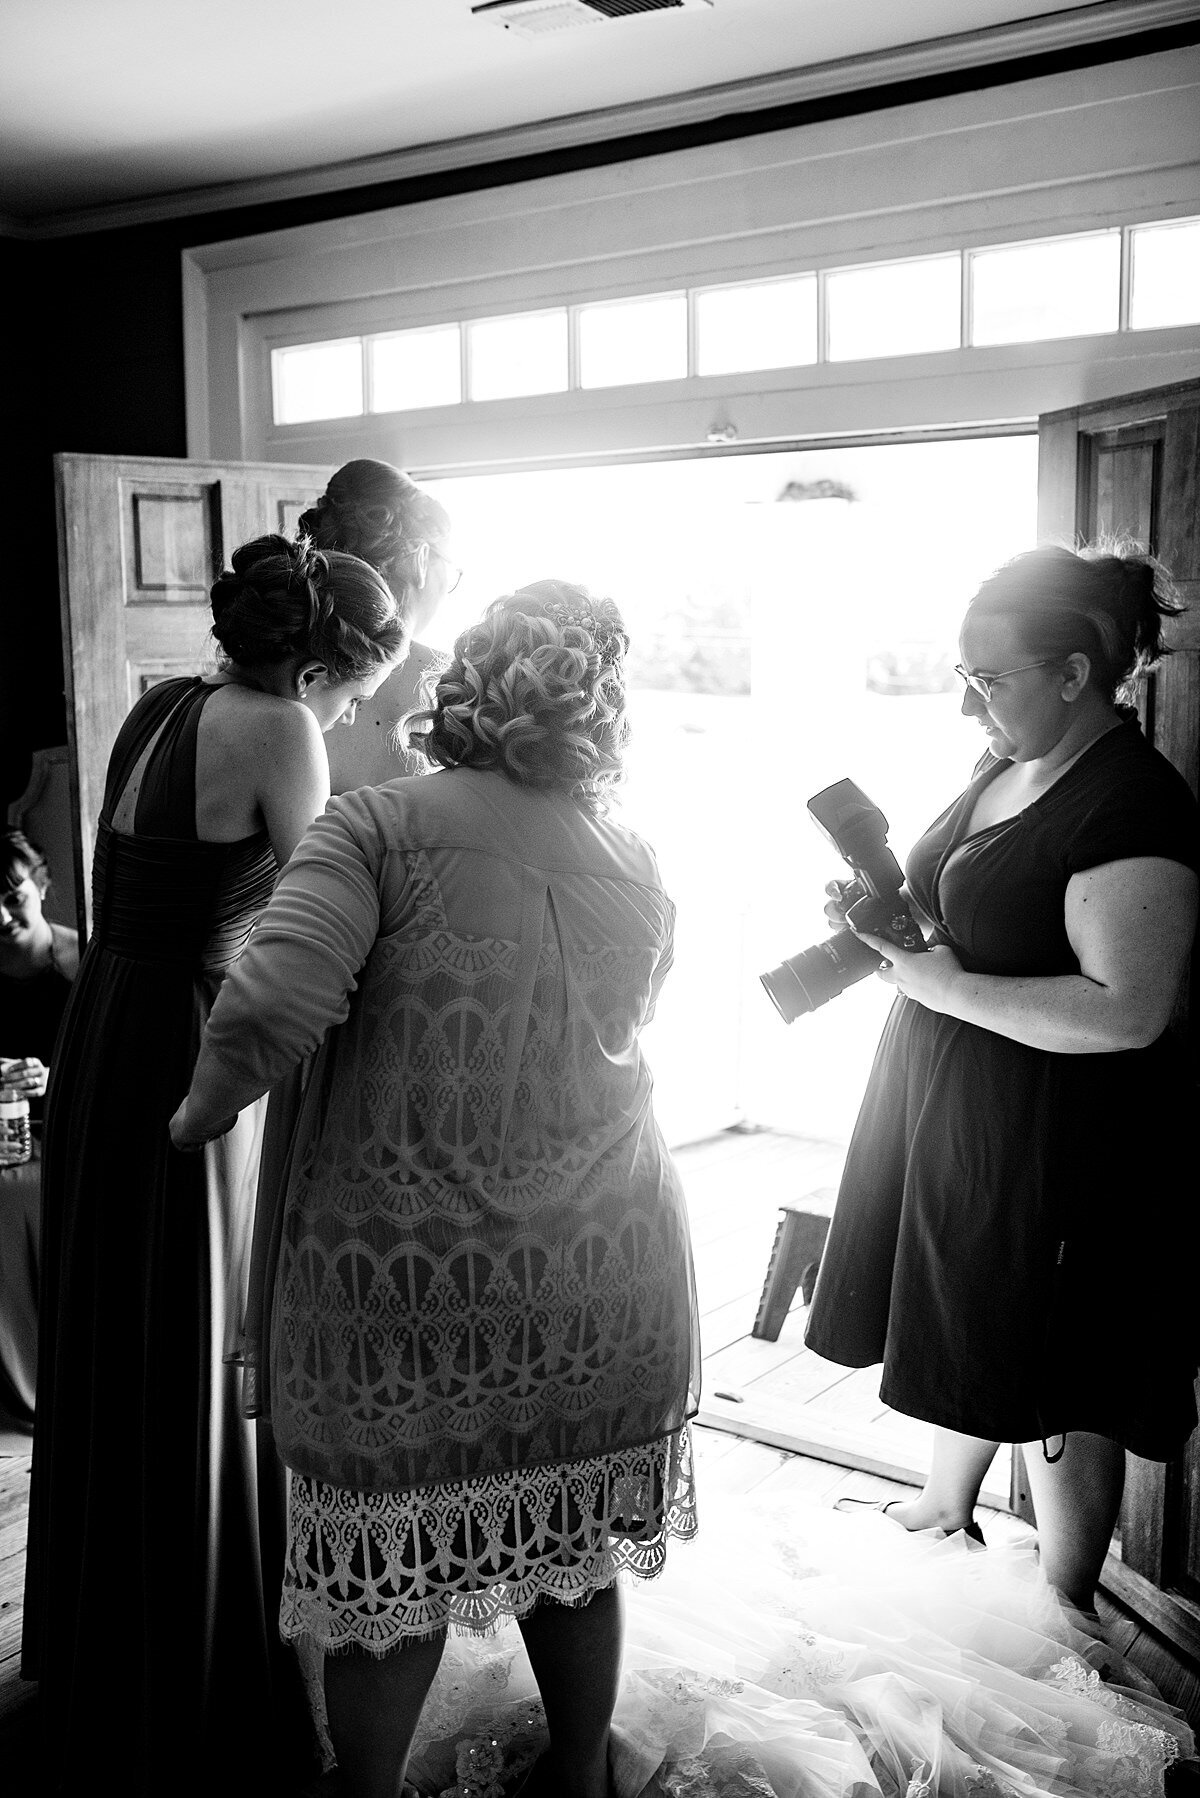 Black and White photo on photographer helping during getting ready